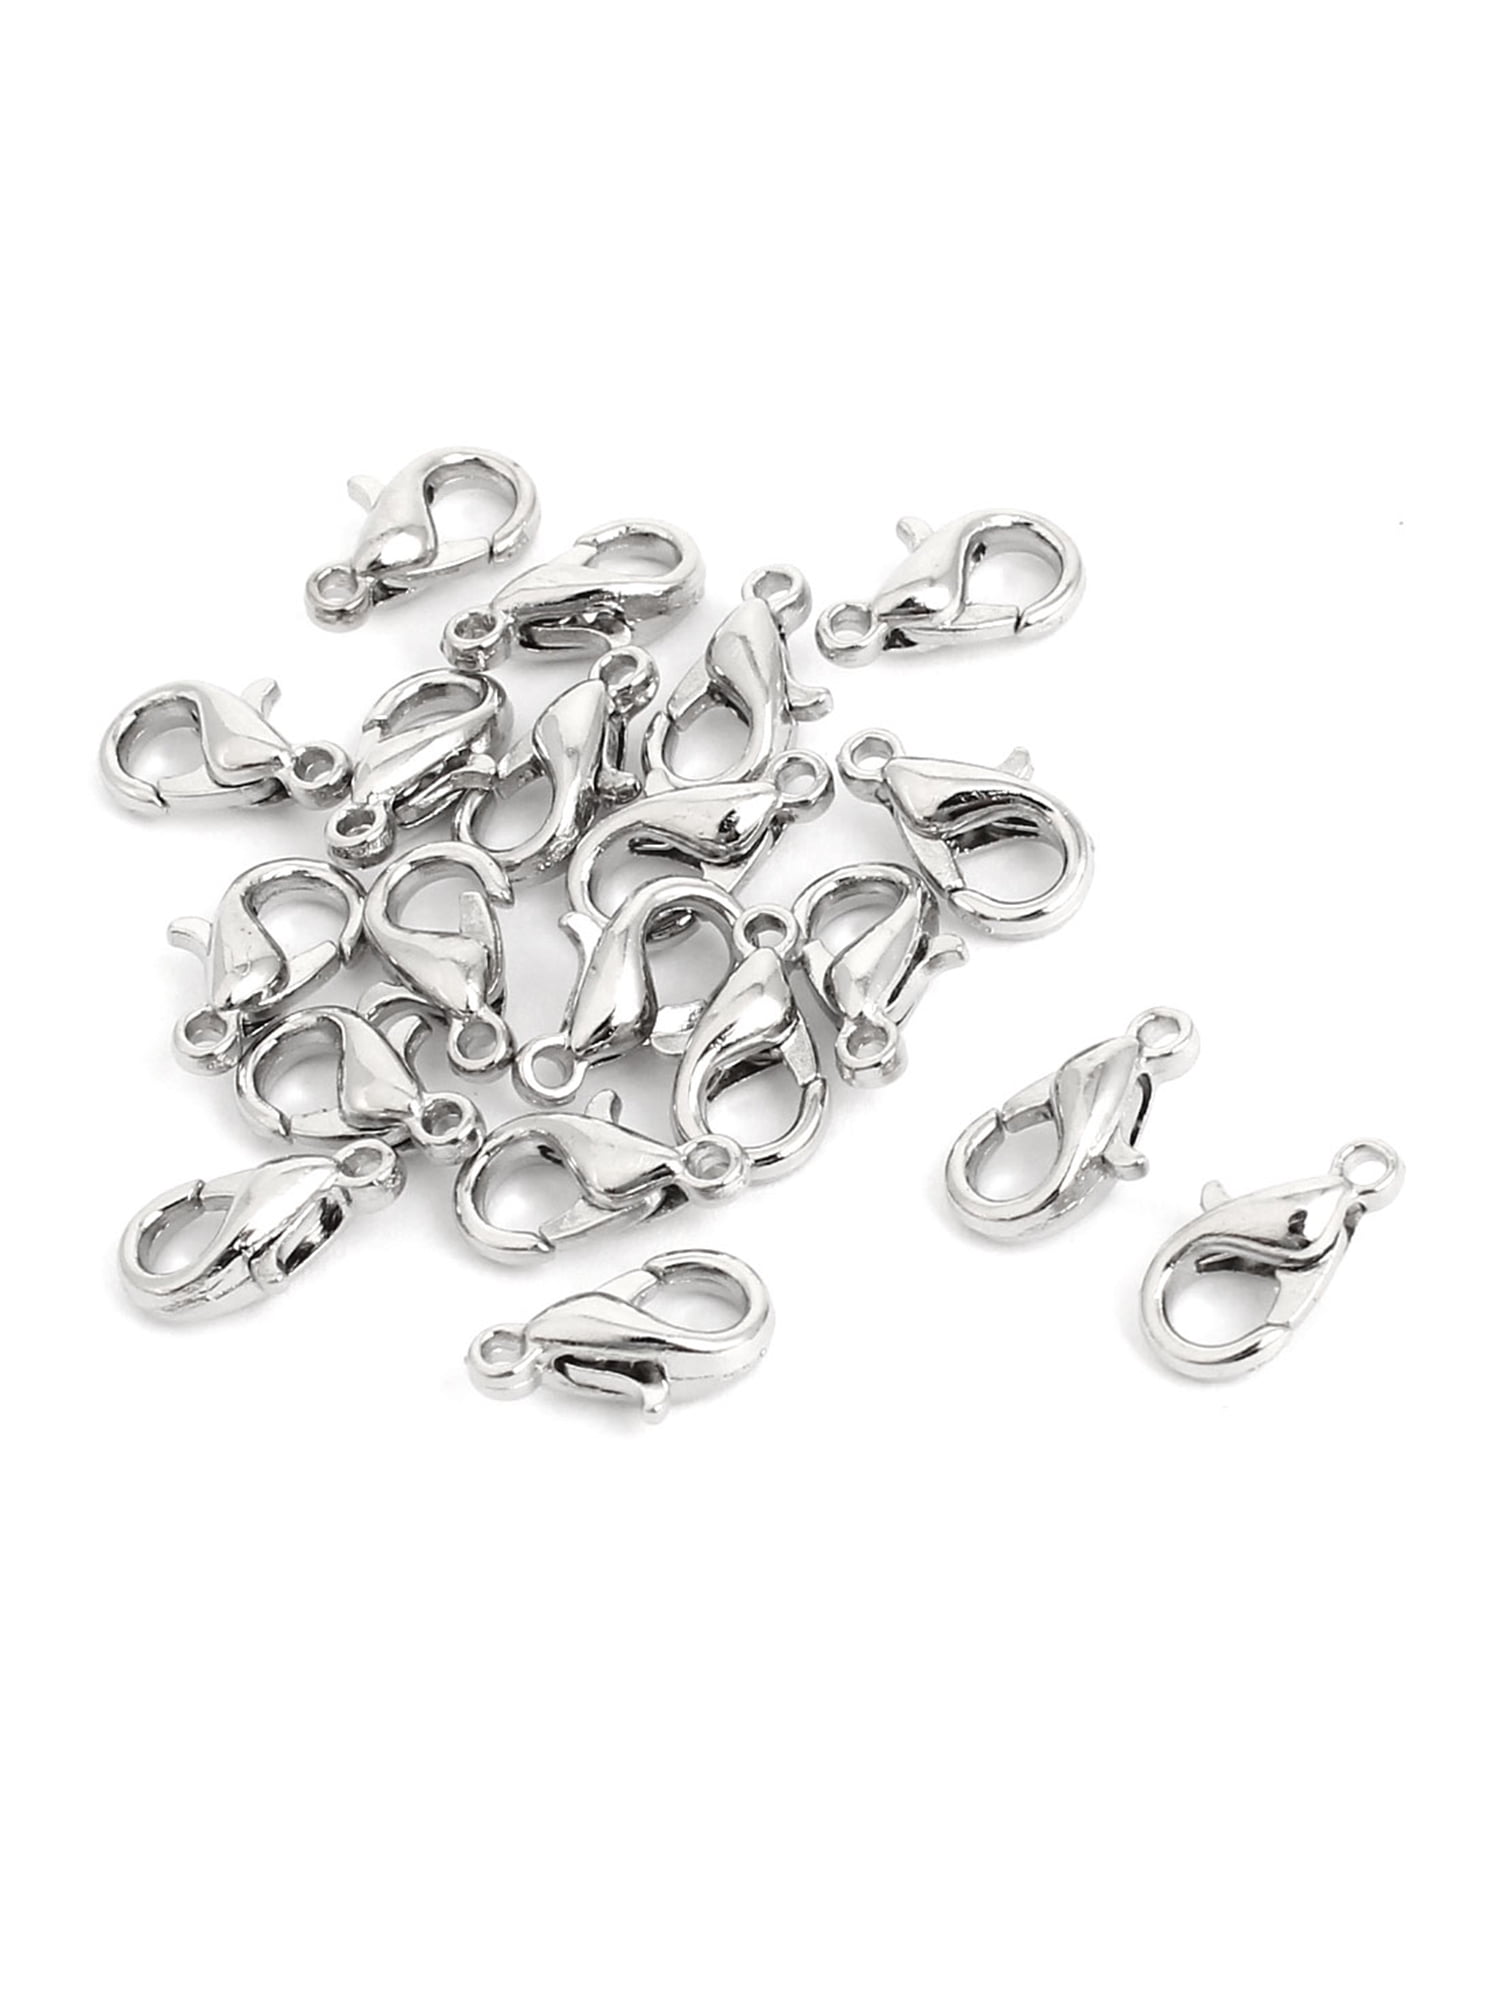 Unique Bargains 20 Pcs 10mm Lobster Claw Clasps Buckles Fasteners for  Necklace Bangle 